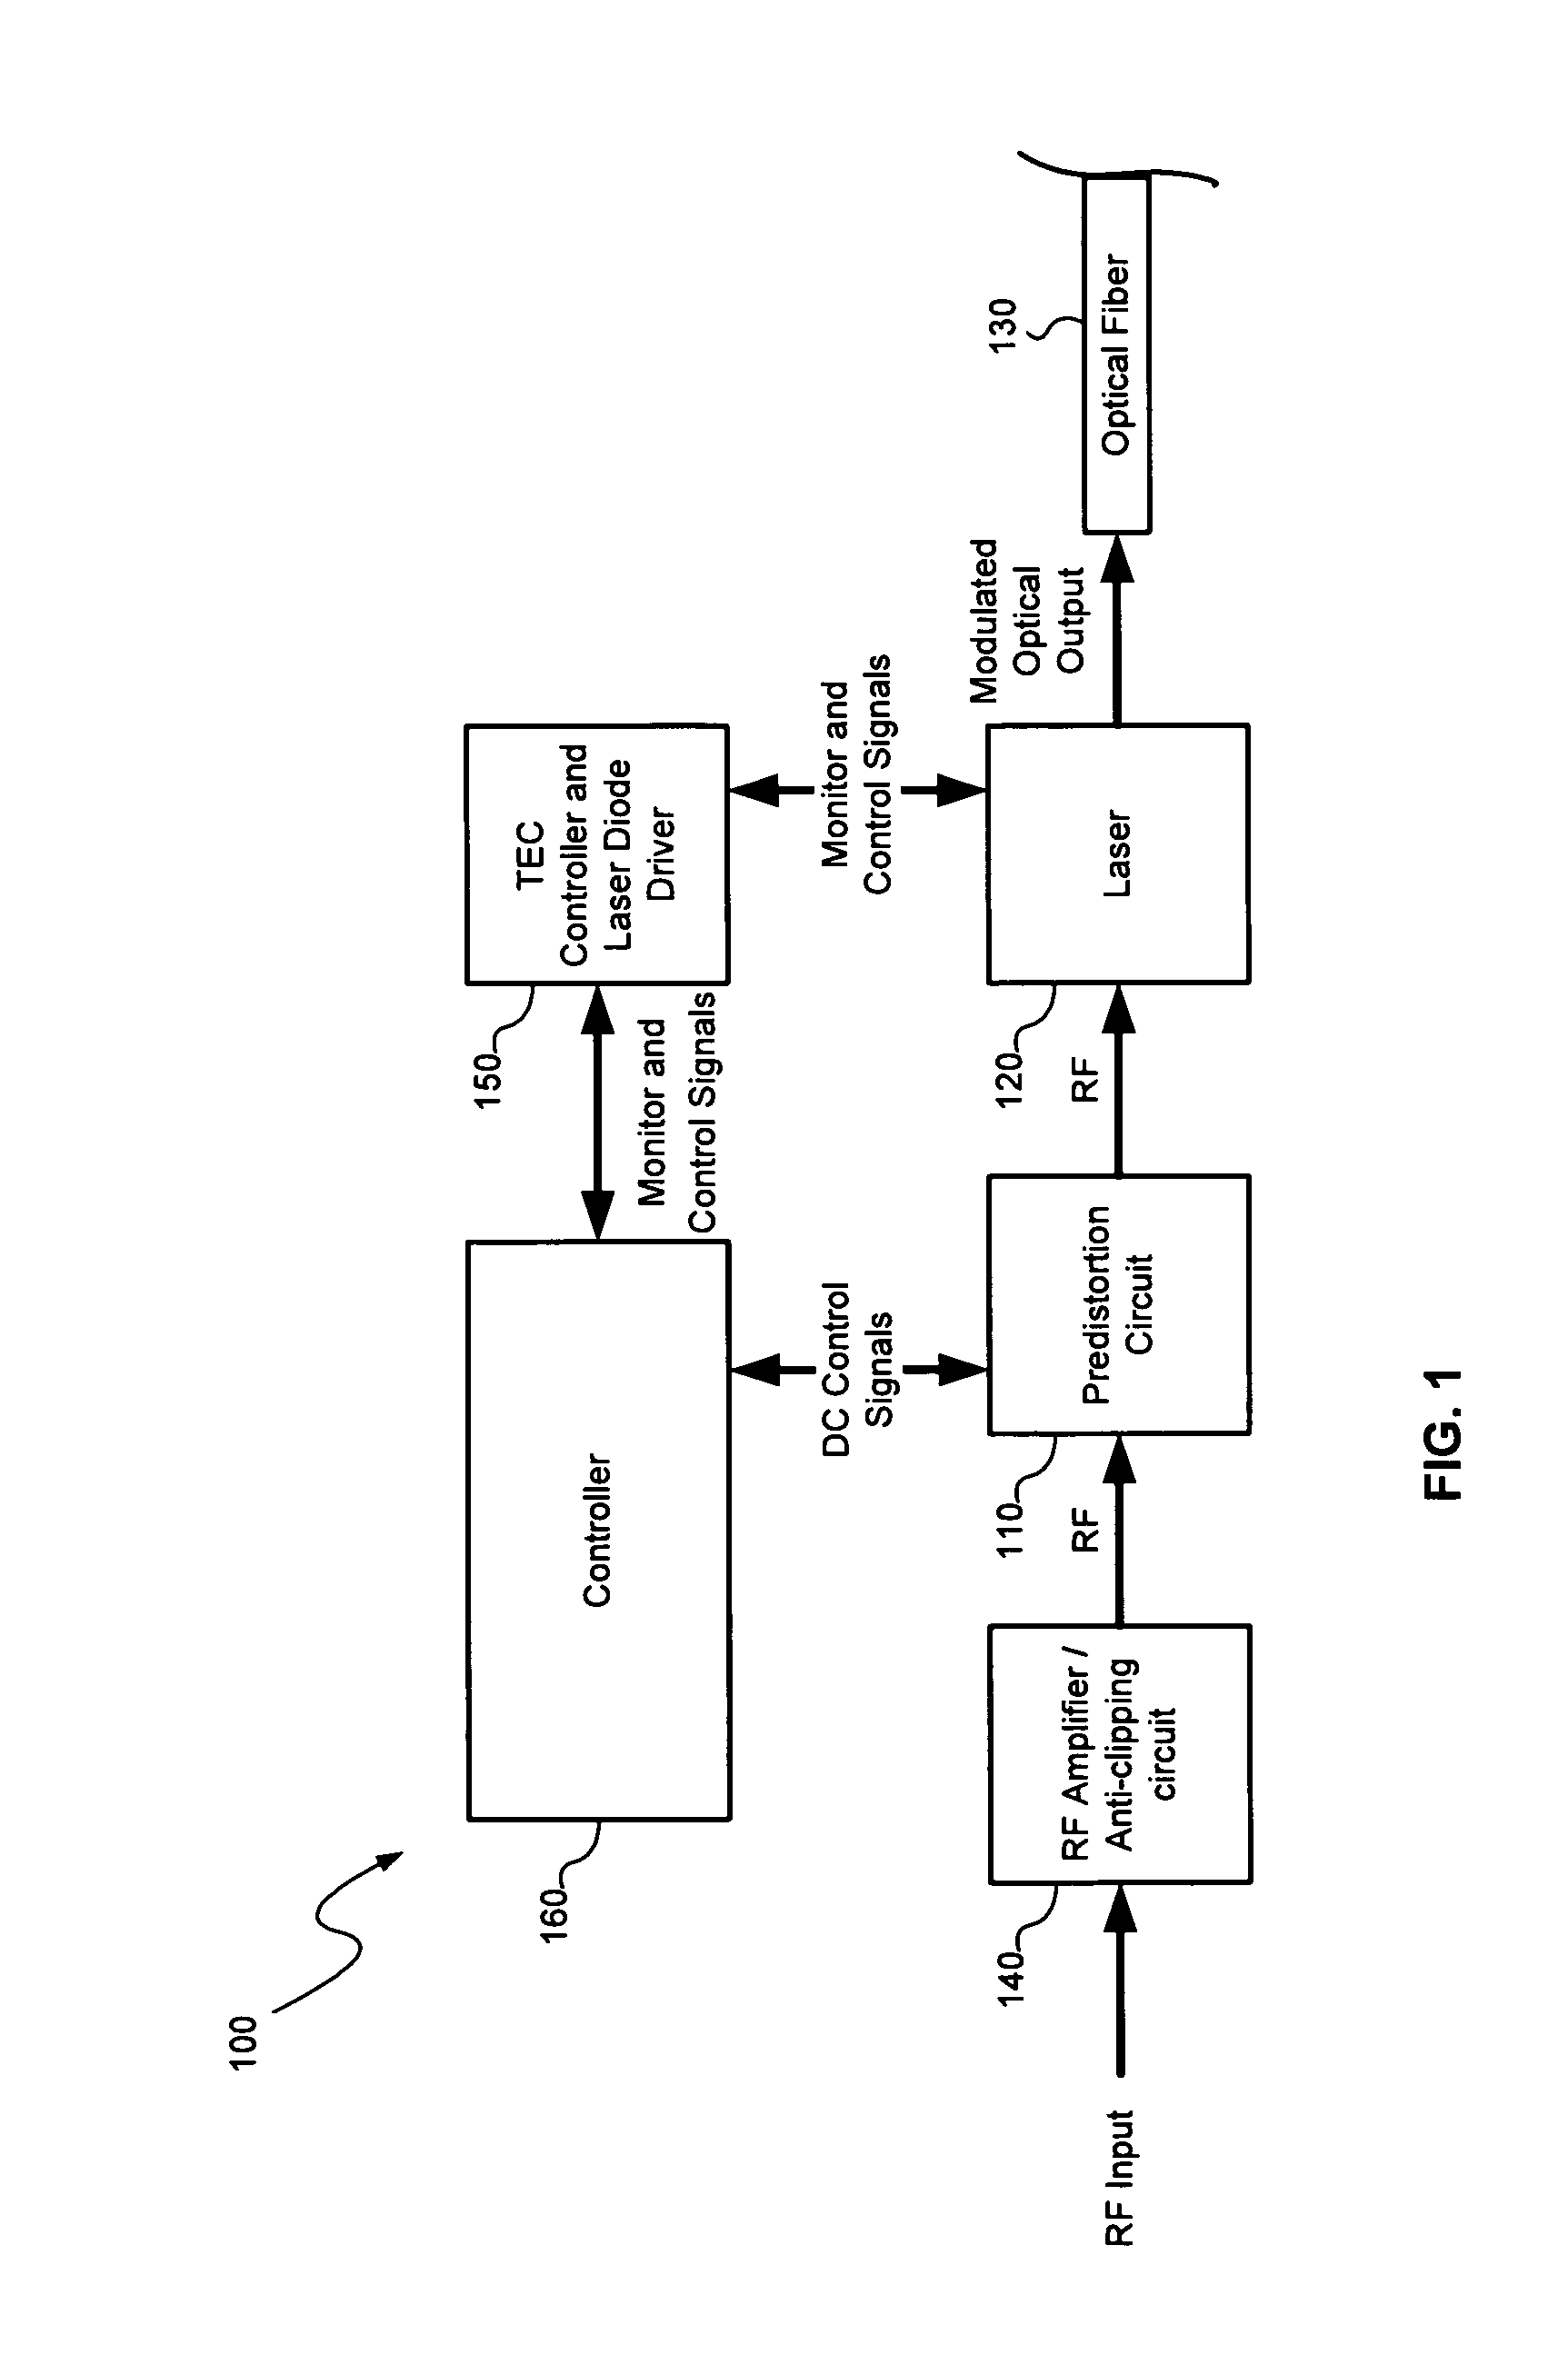 Distortion compensation circuit and method based on orders of time dependent series of distortion signal